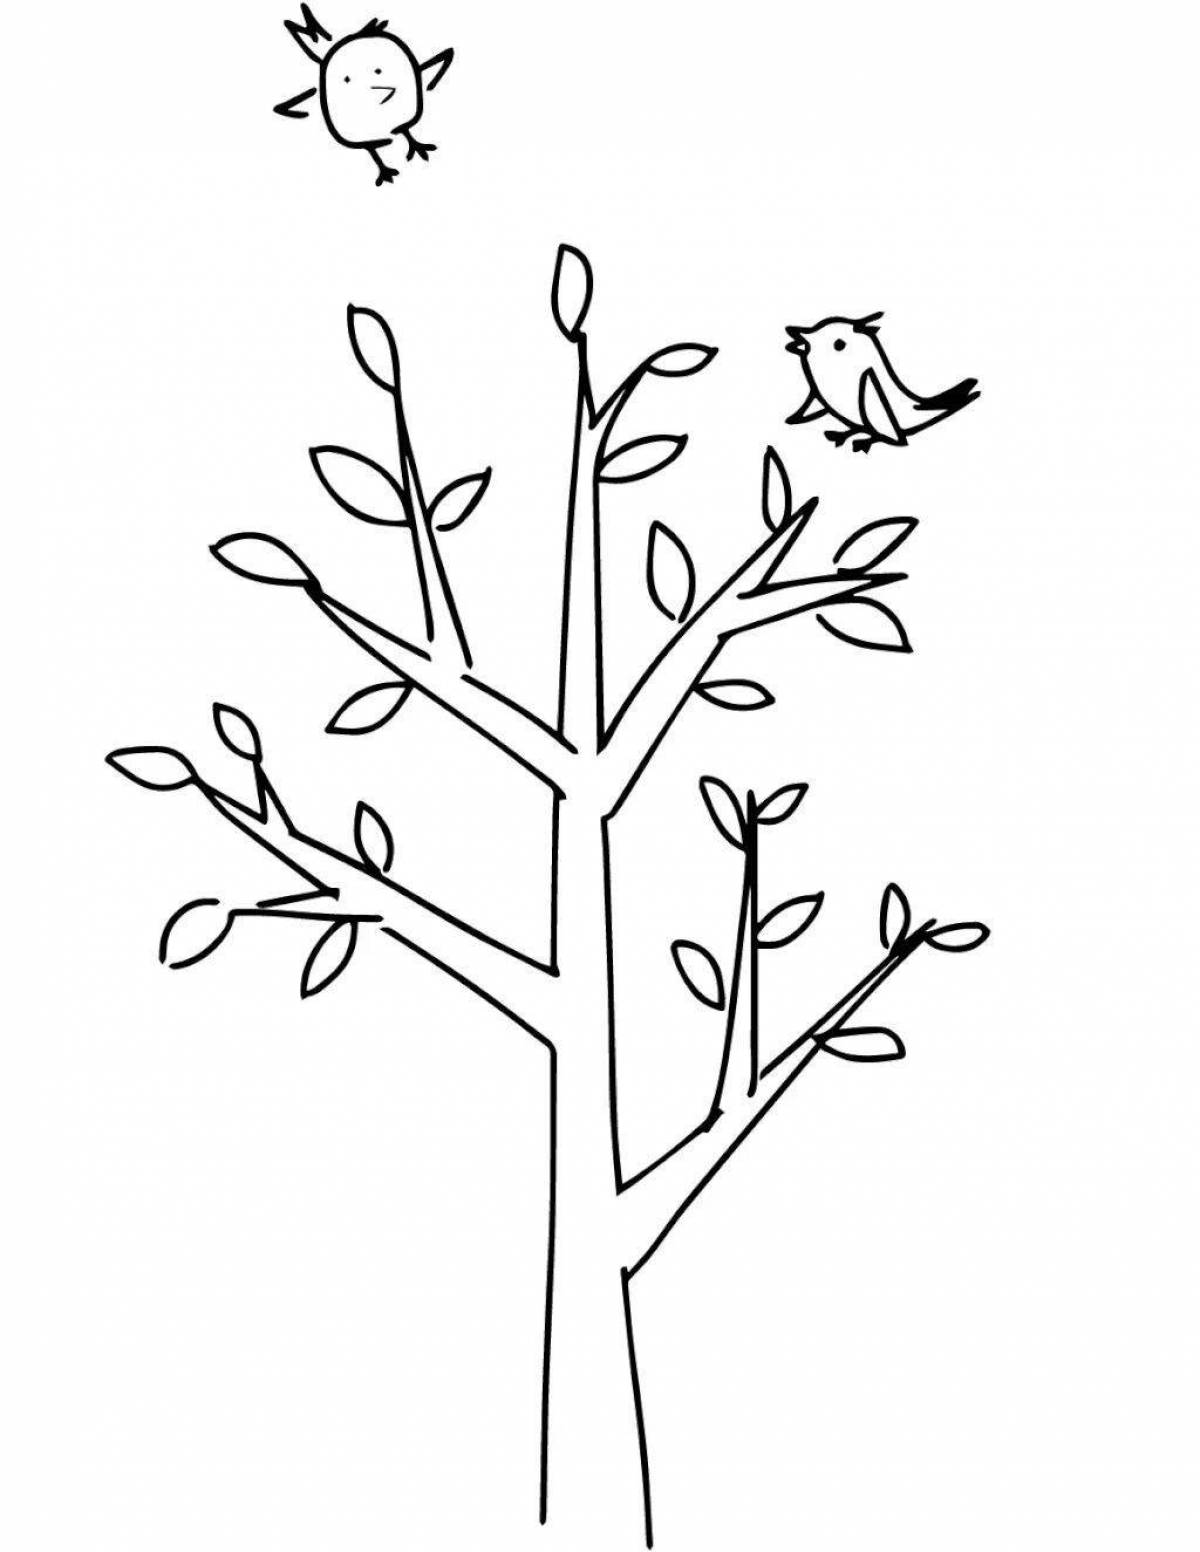 Coloring tree living tree for children 4-5 years old